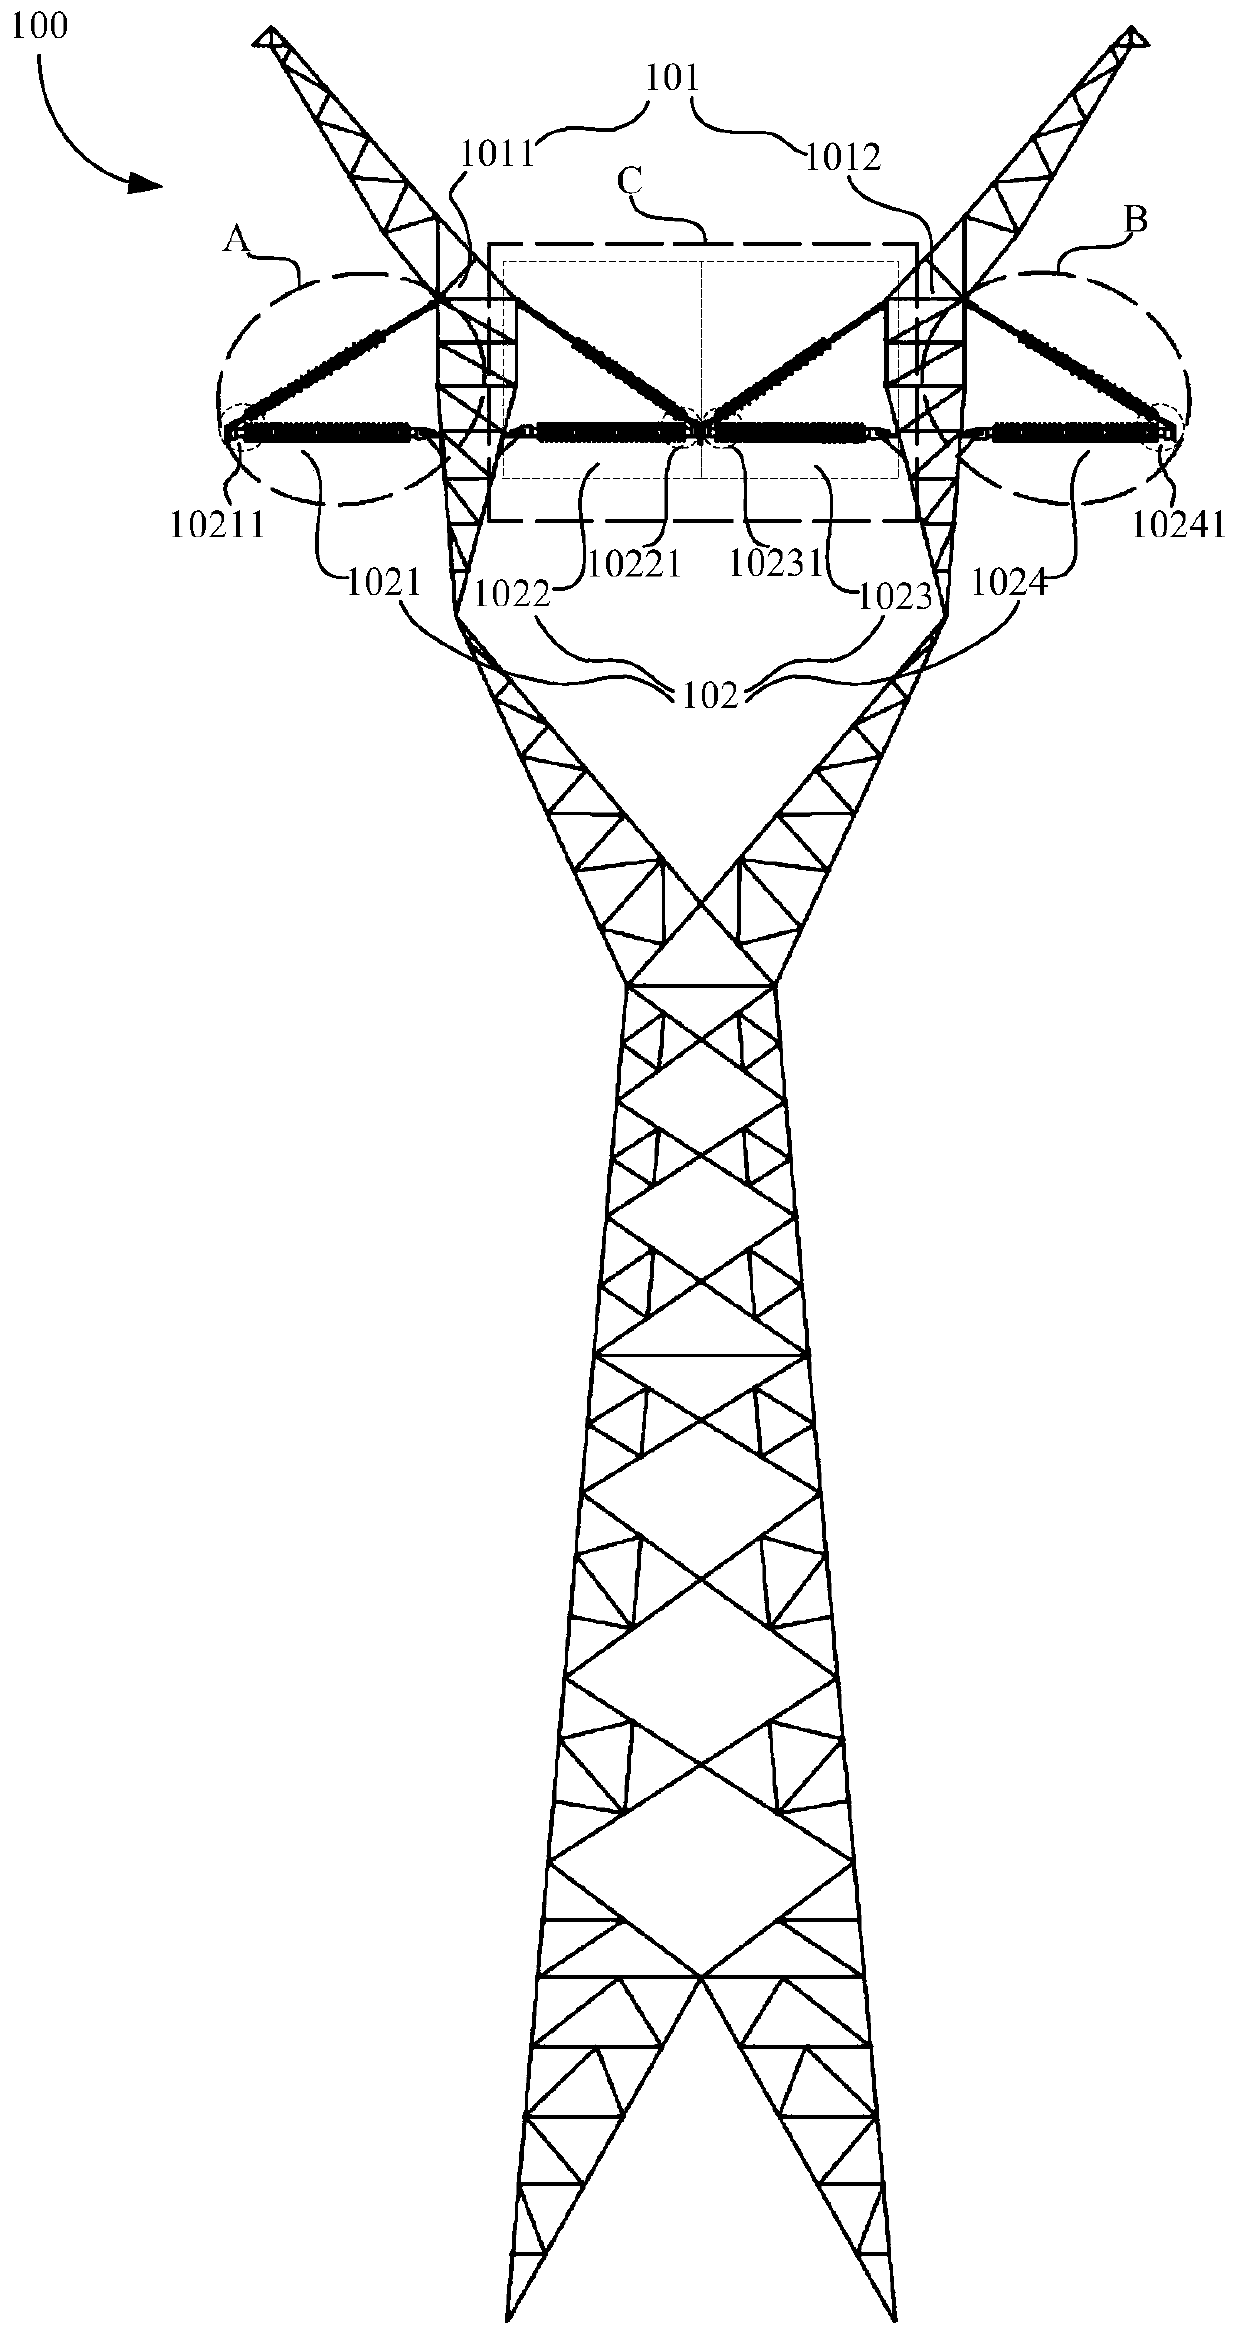 Cup type tower